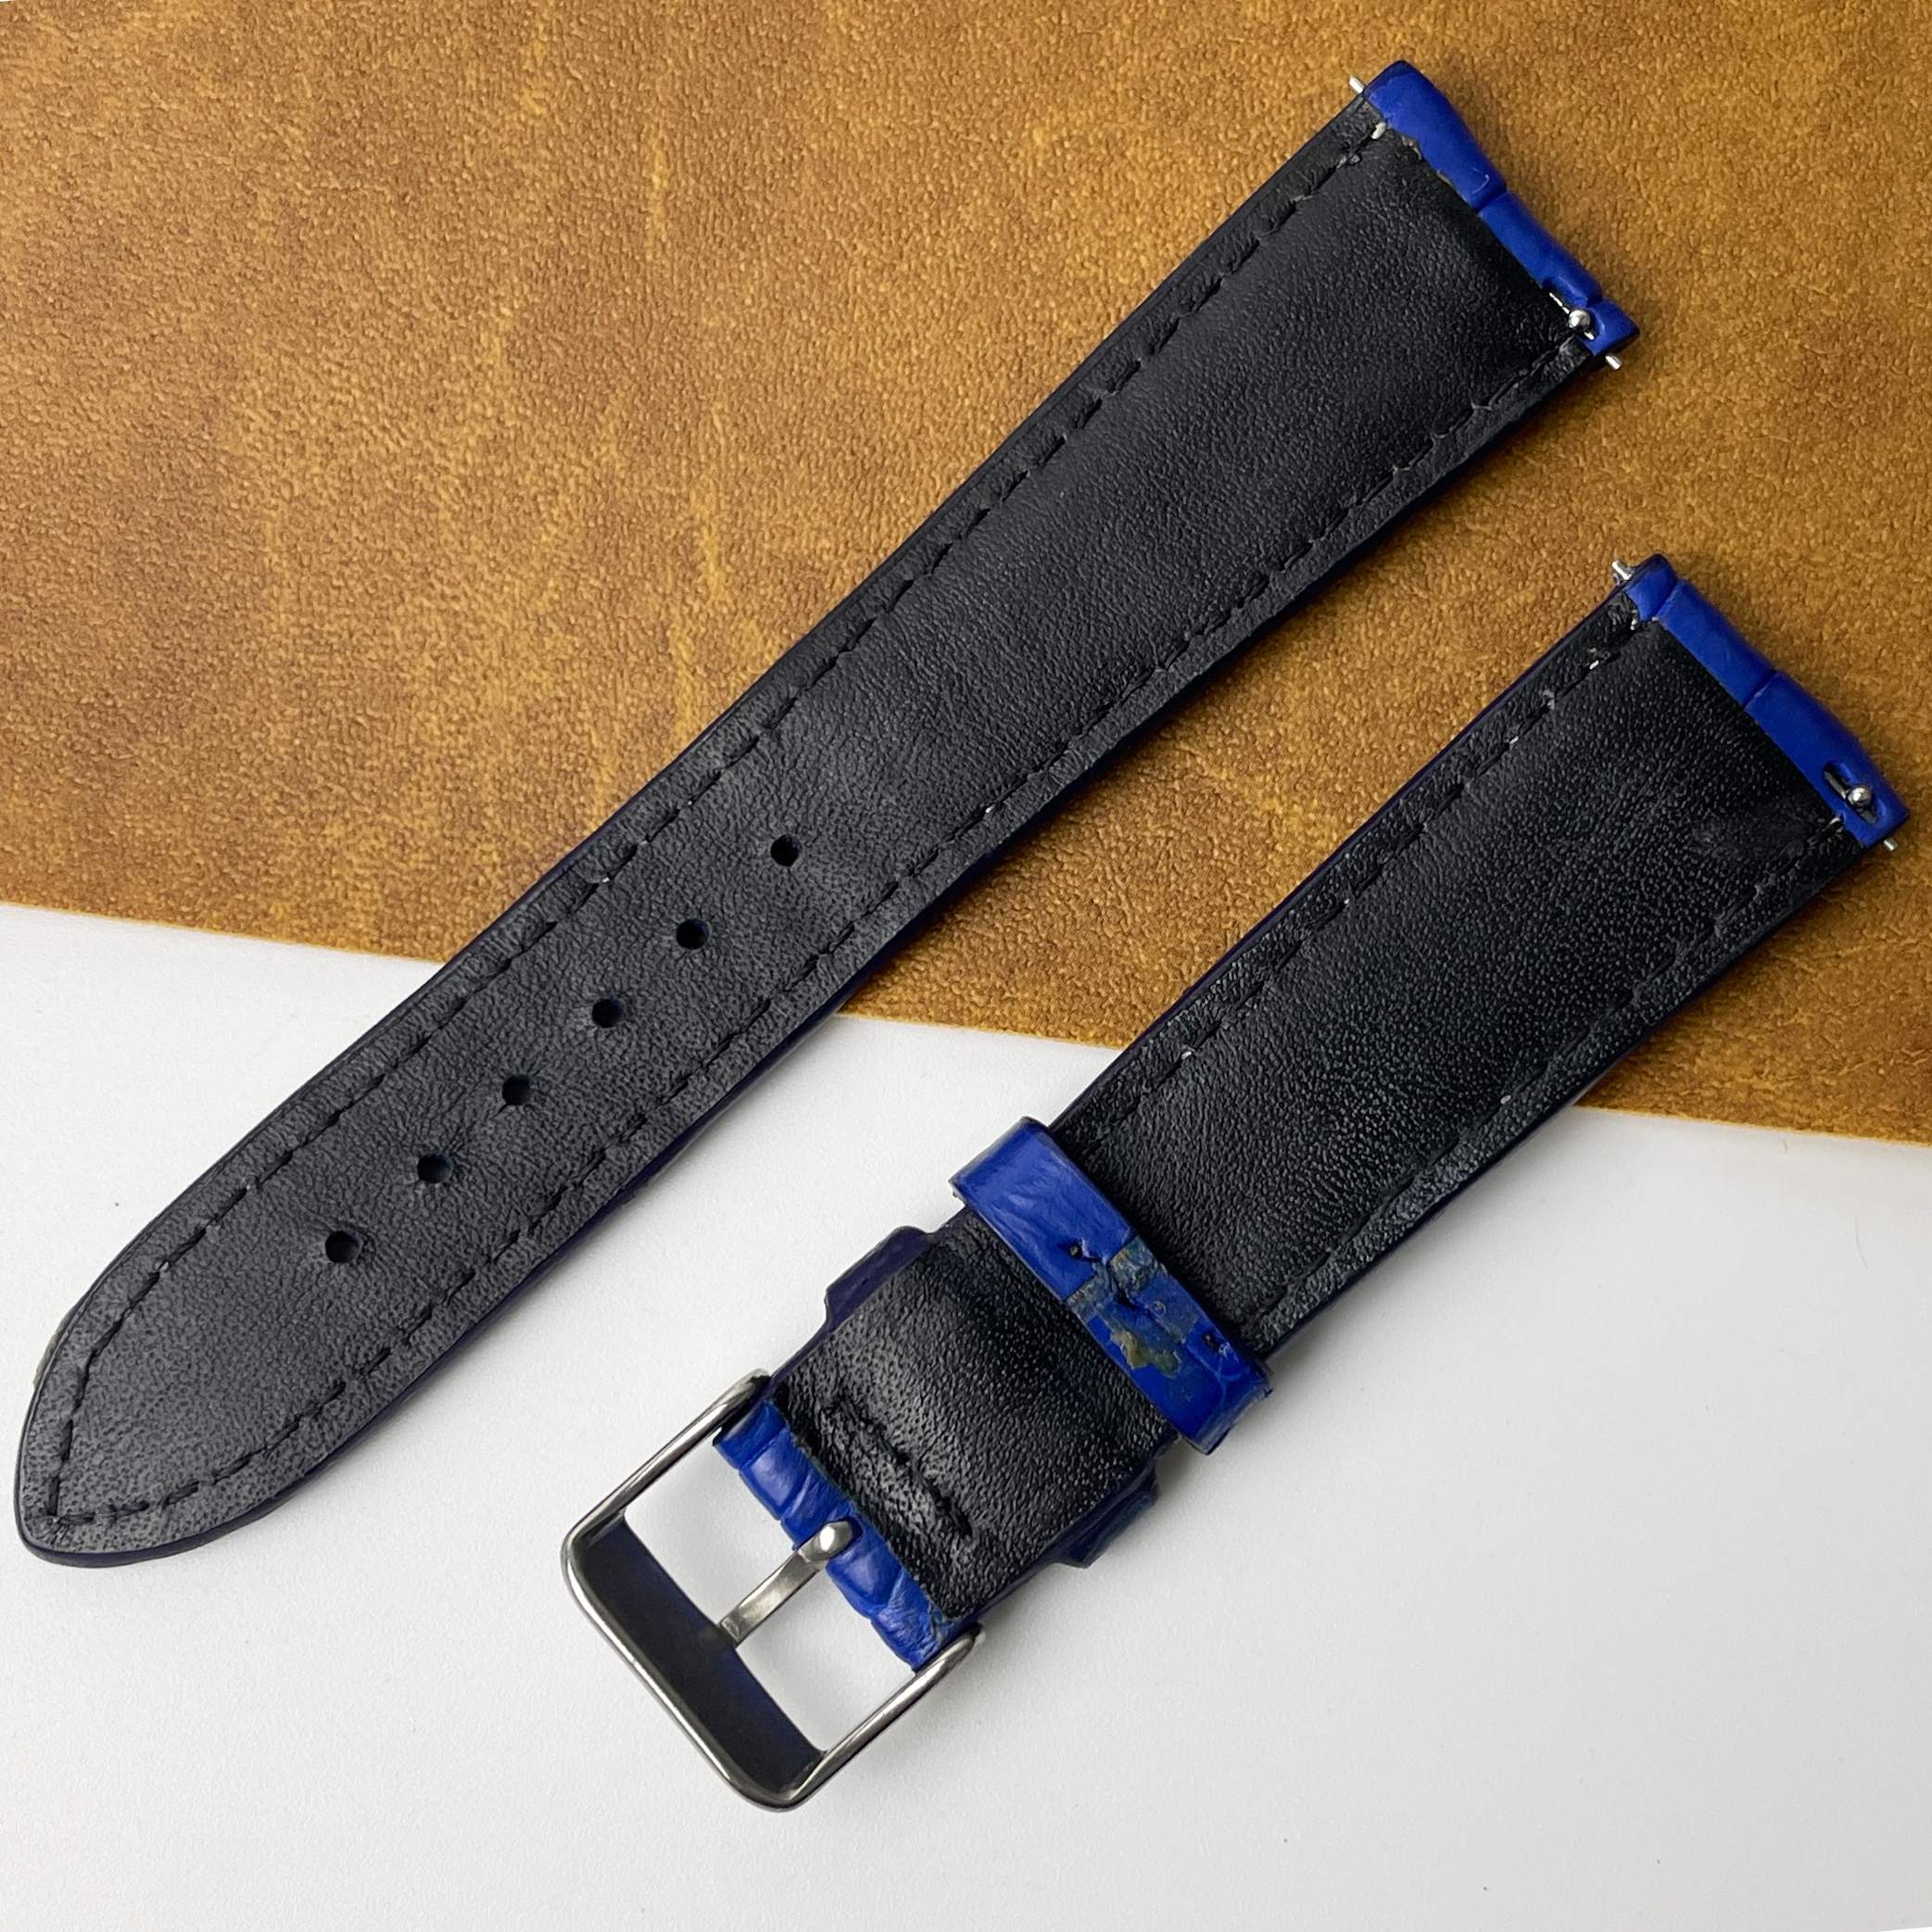 Unique White Hand-stitching Blue Alligator Leather Watch Band For Men